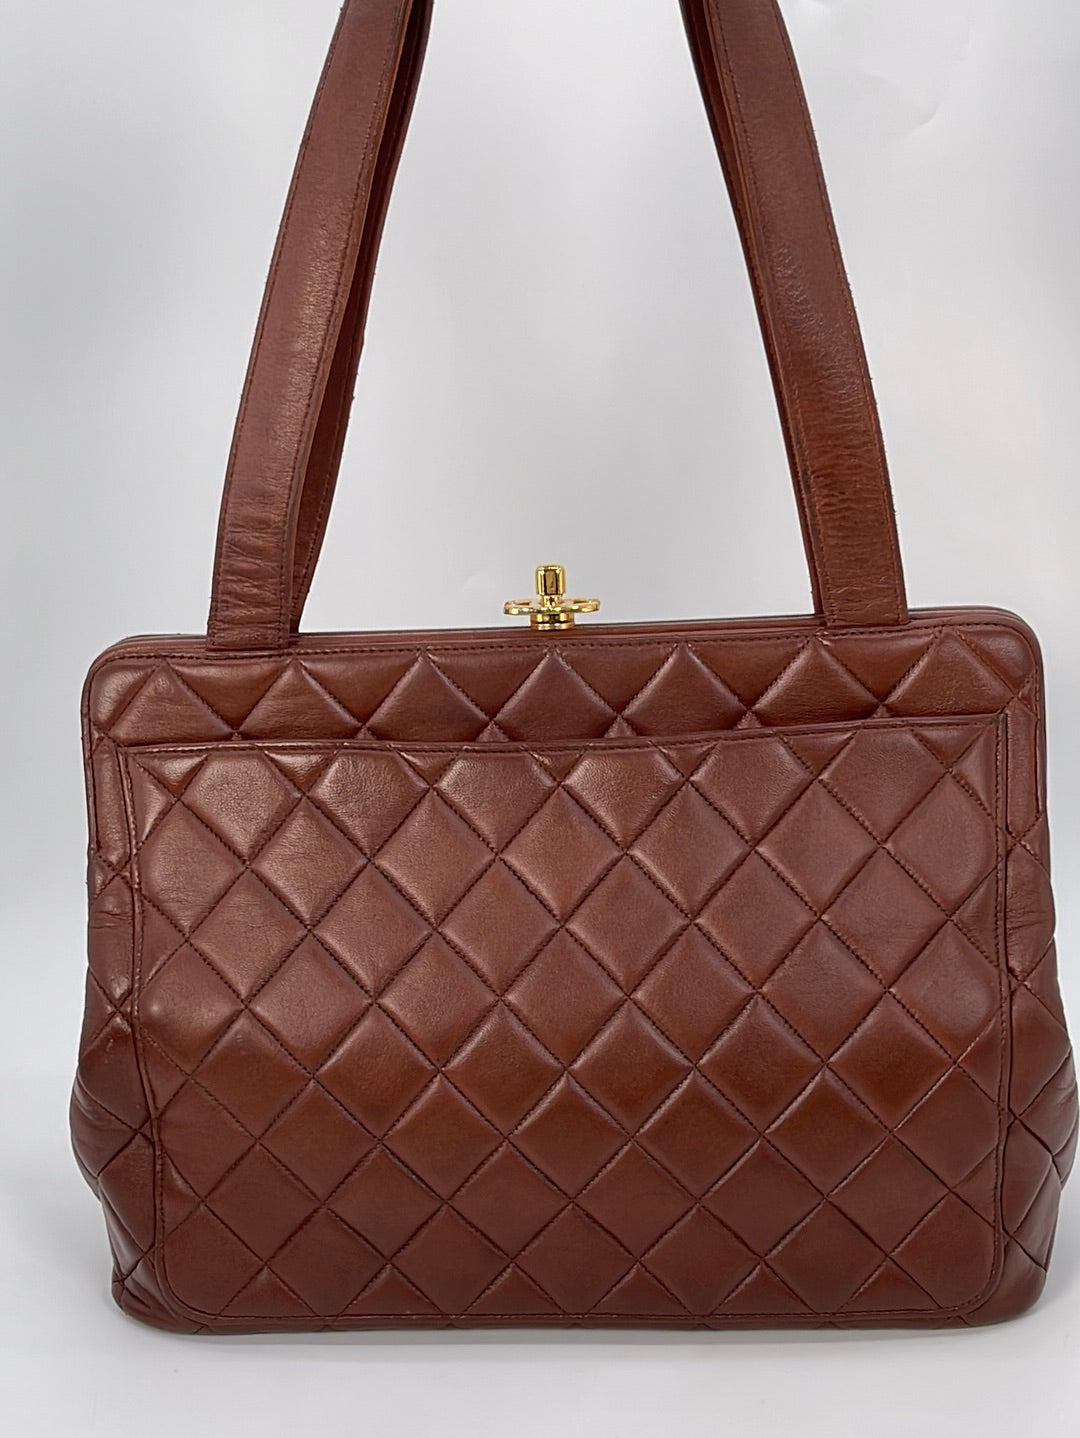 Preloved Chanel Brown Diamond Quilted Lambskin Leather CC Kiss Lock Tote 4392729 022723